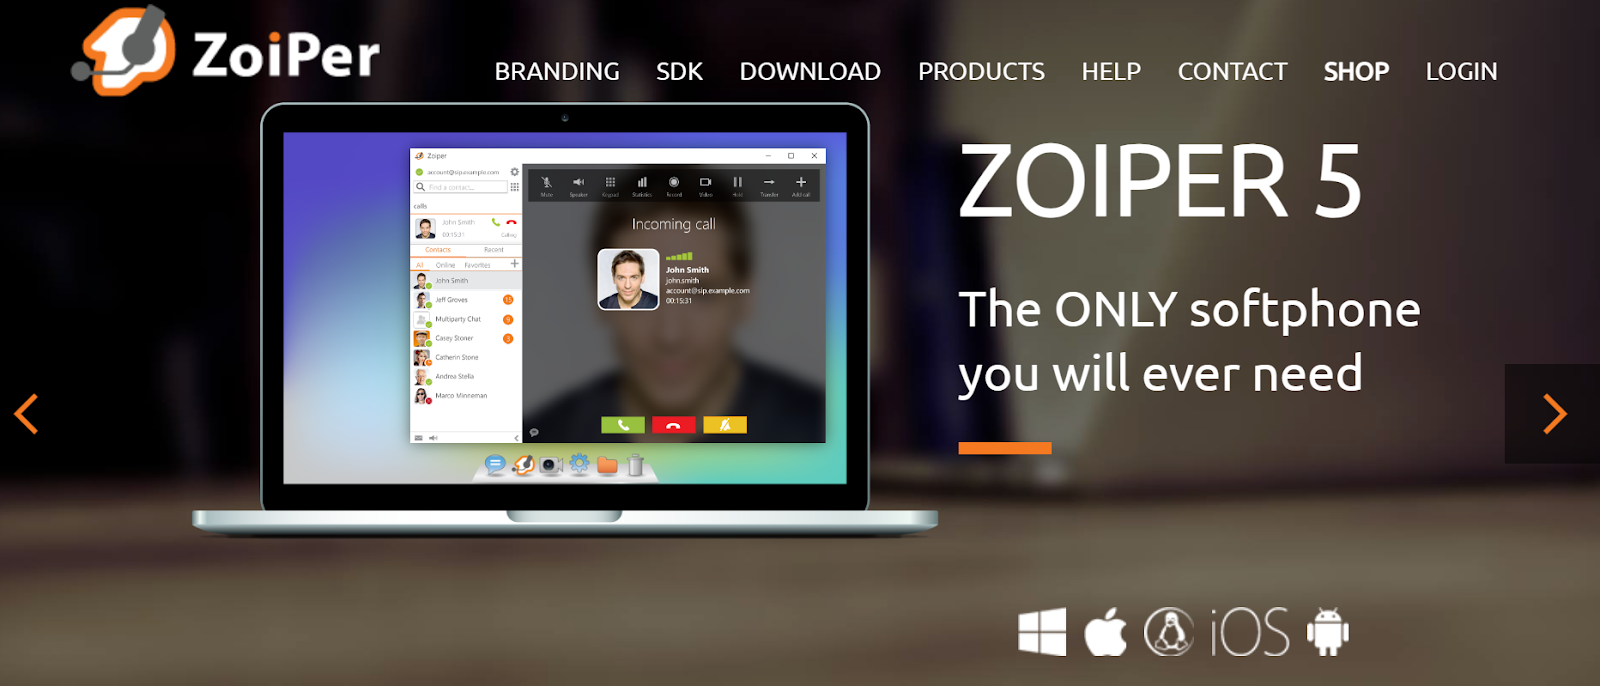 ZoiPer website snapshot highlighting the services it offers.